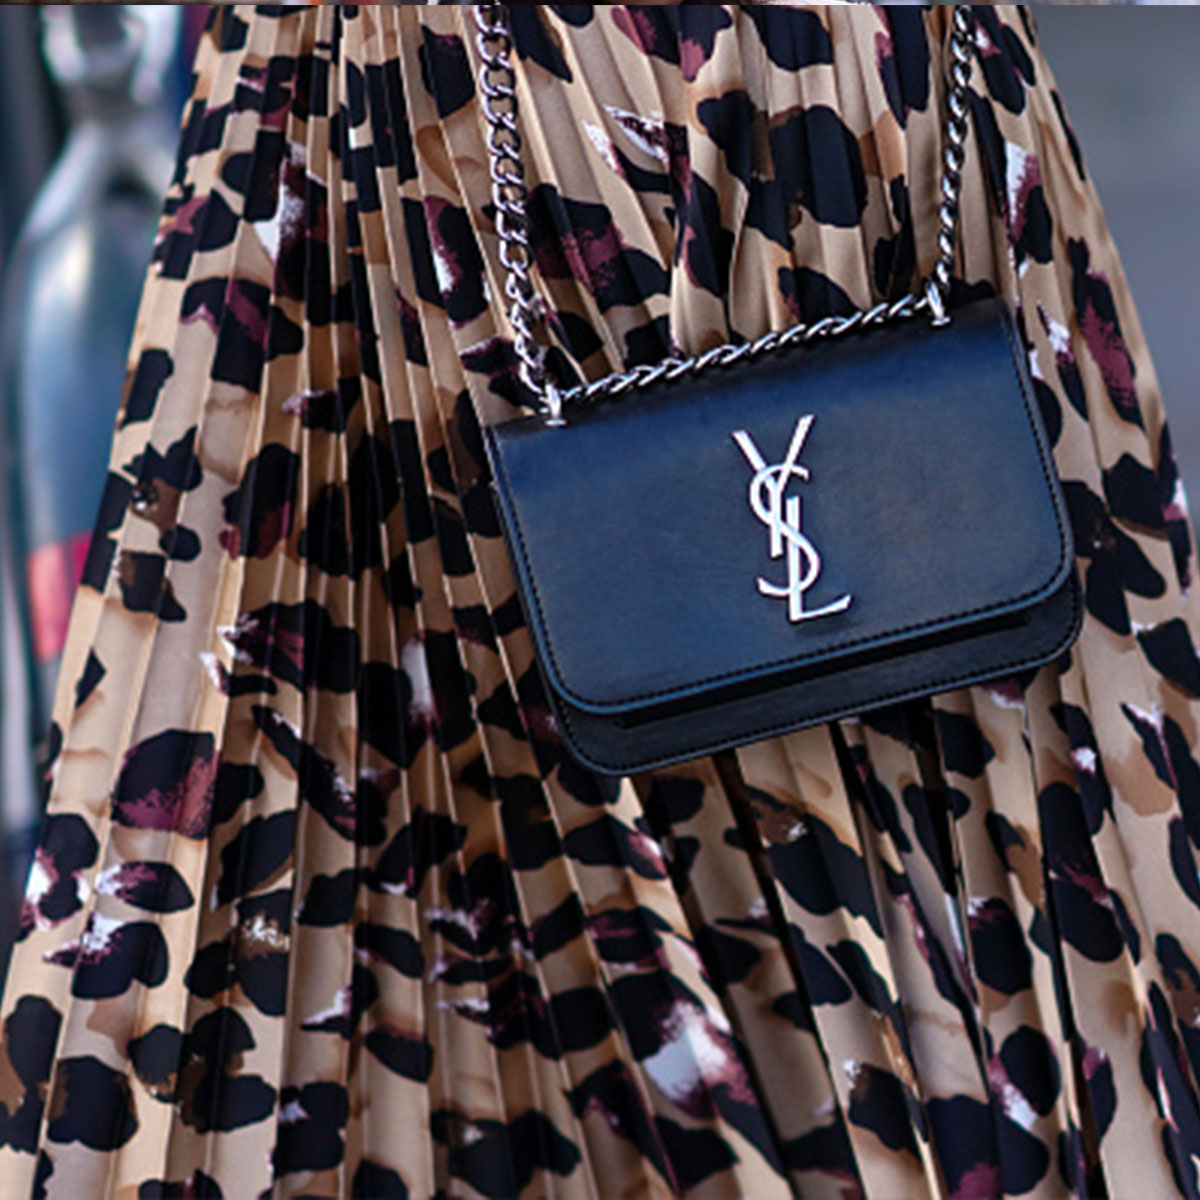 Why is YSL so expensive? - Quora